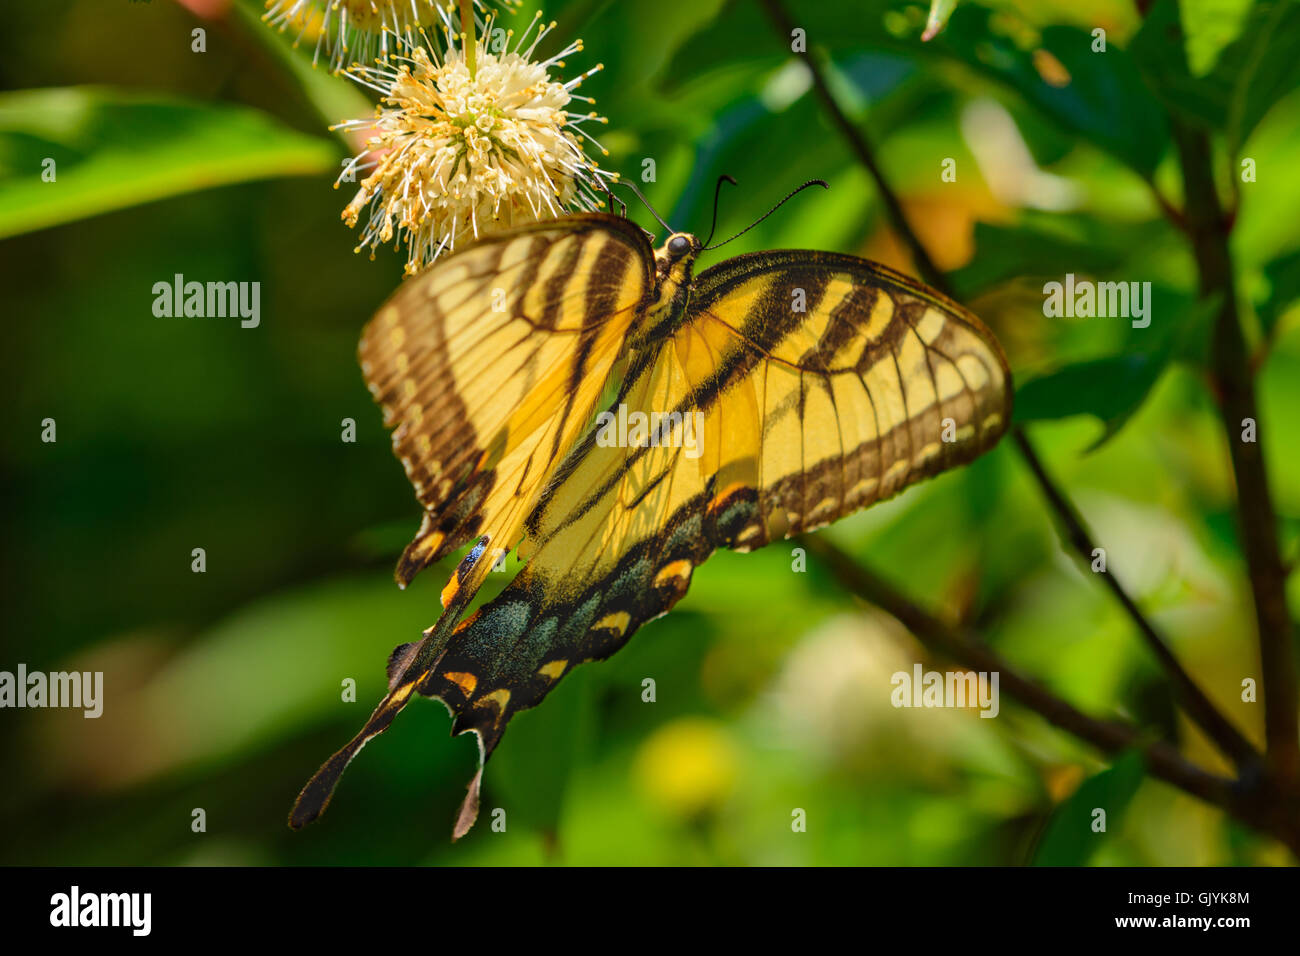 Eastern tiger swallowtail (Papilio glaucus) butterfly with vivid blue yellow and black. Stock Photo